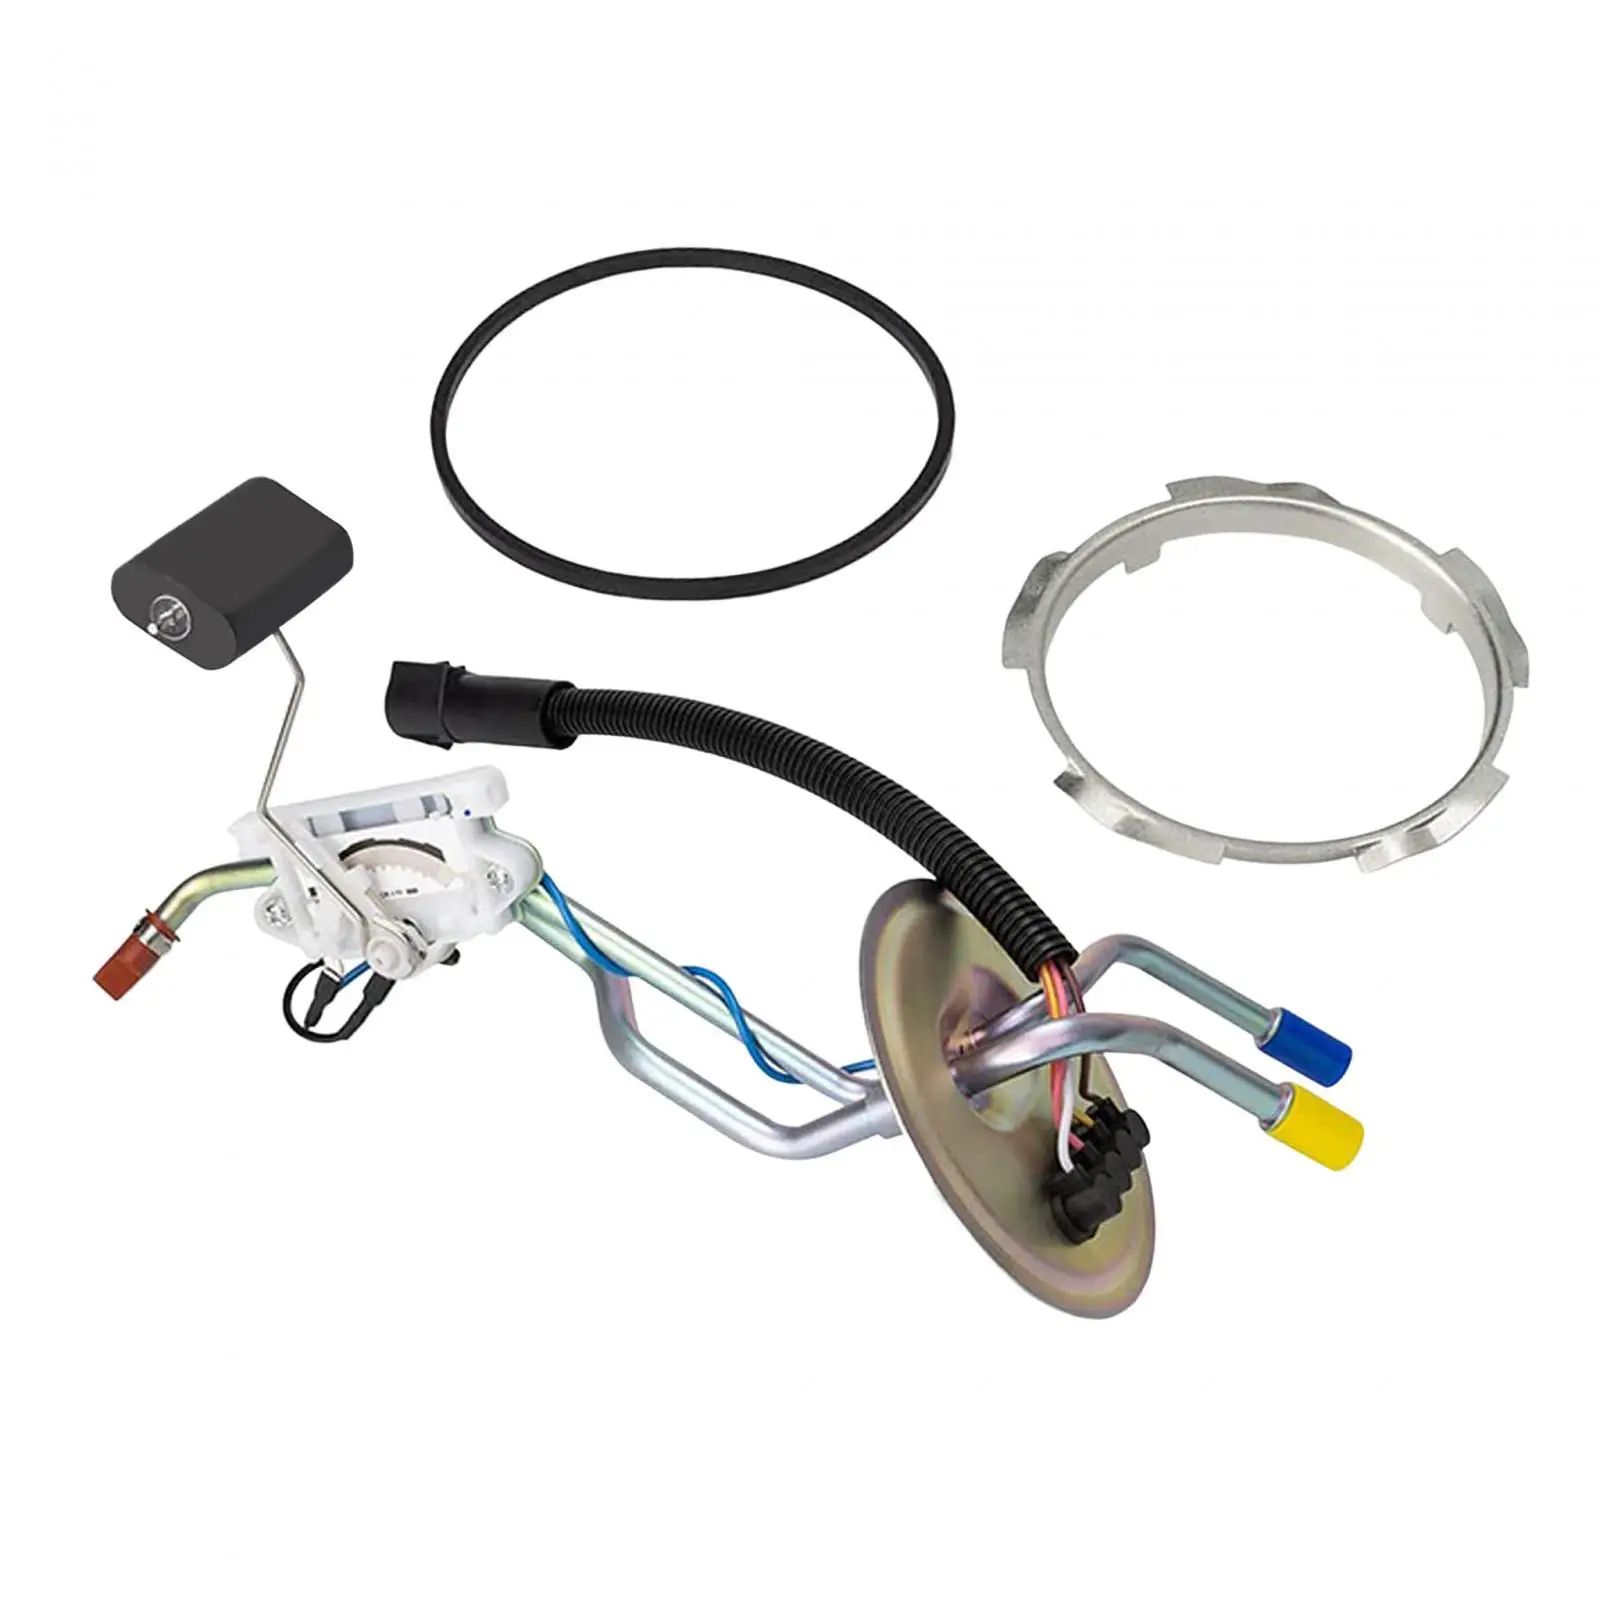 Diesel Fuel Pump Tank Sending Unit Replacement Fmsu-9der for Ford F250 F350 Auto Accessories Professional Easy Installation